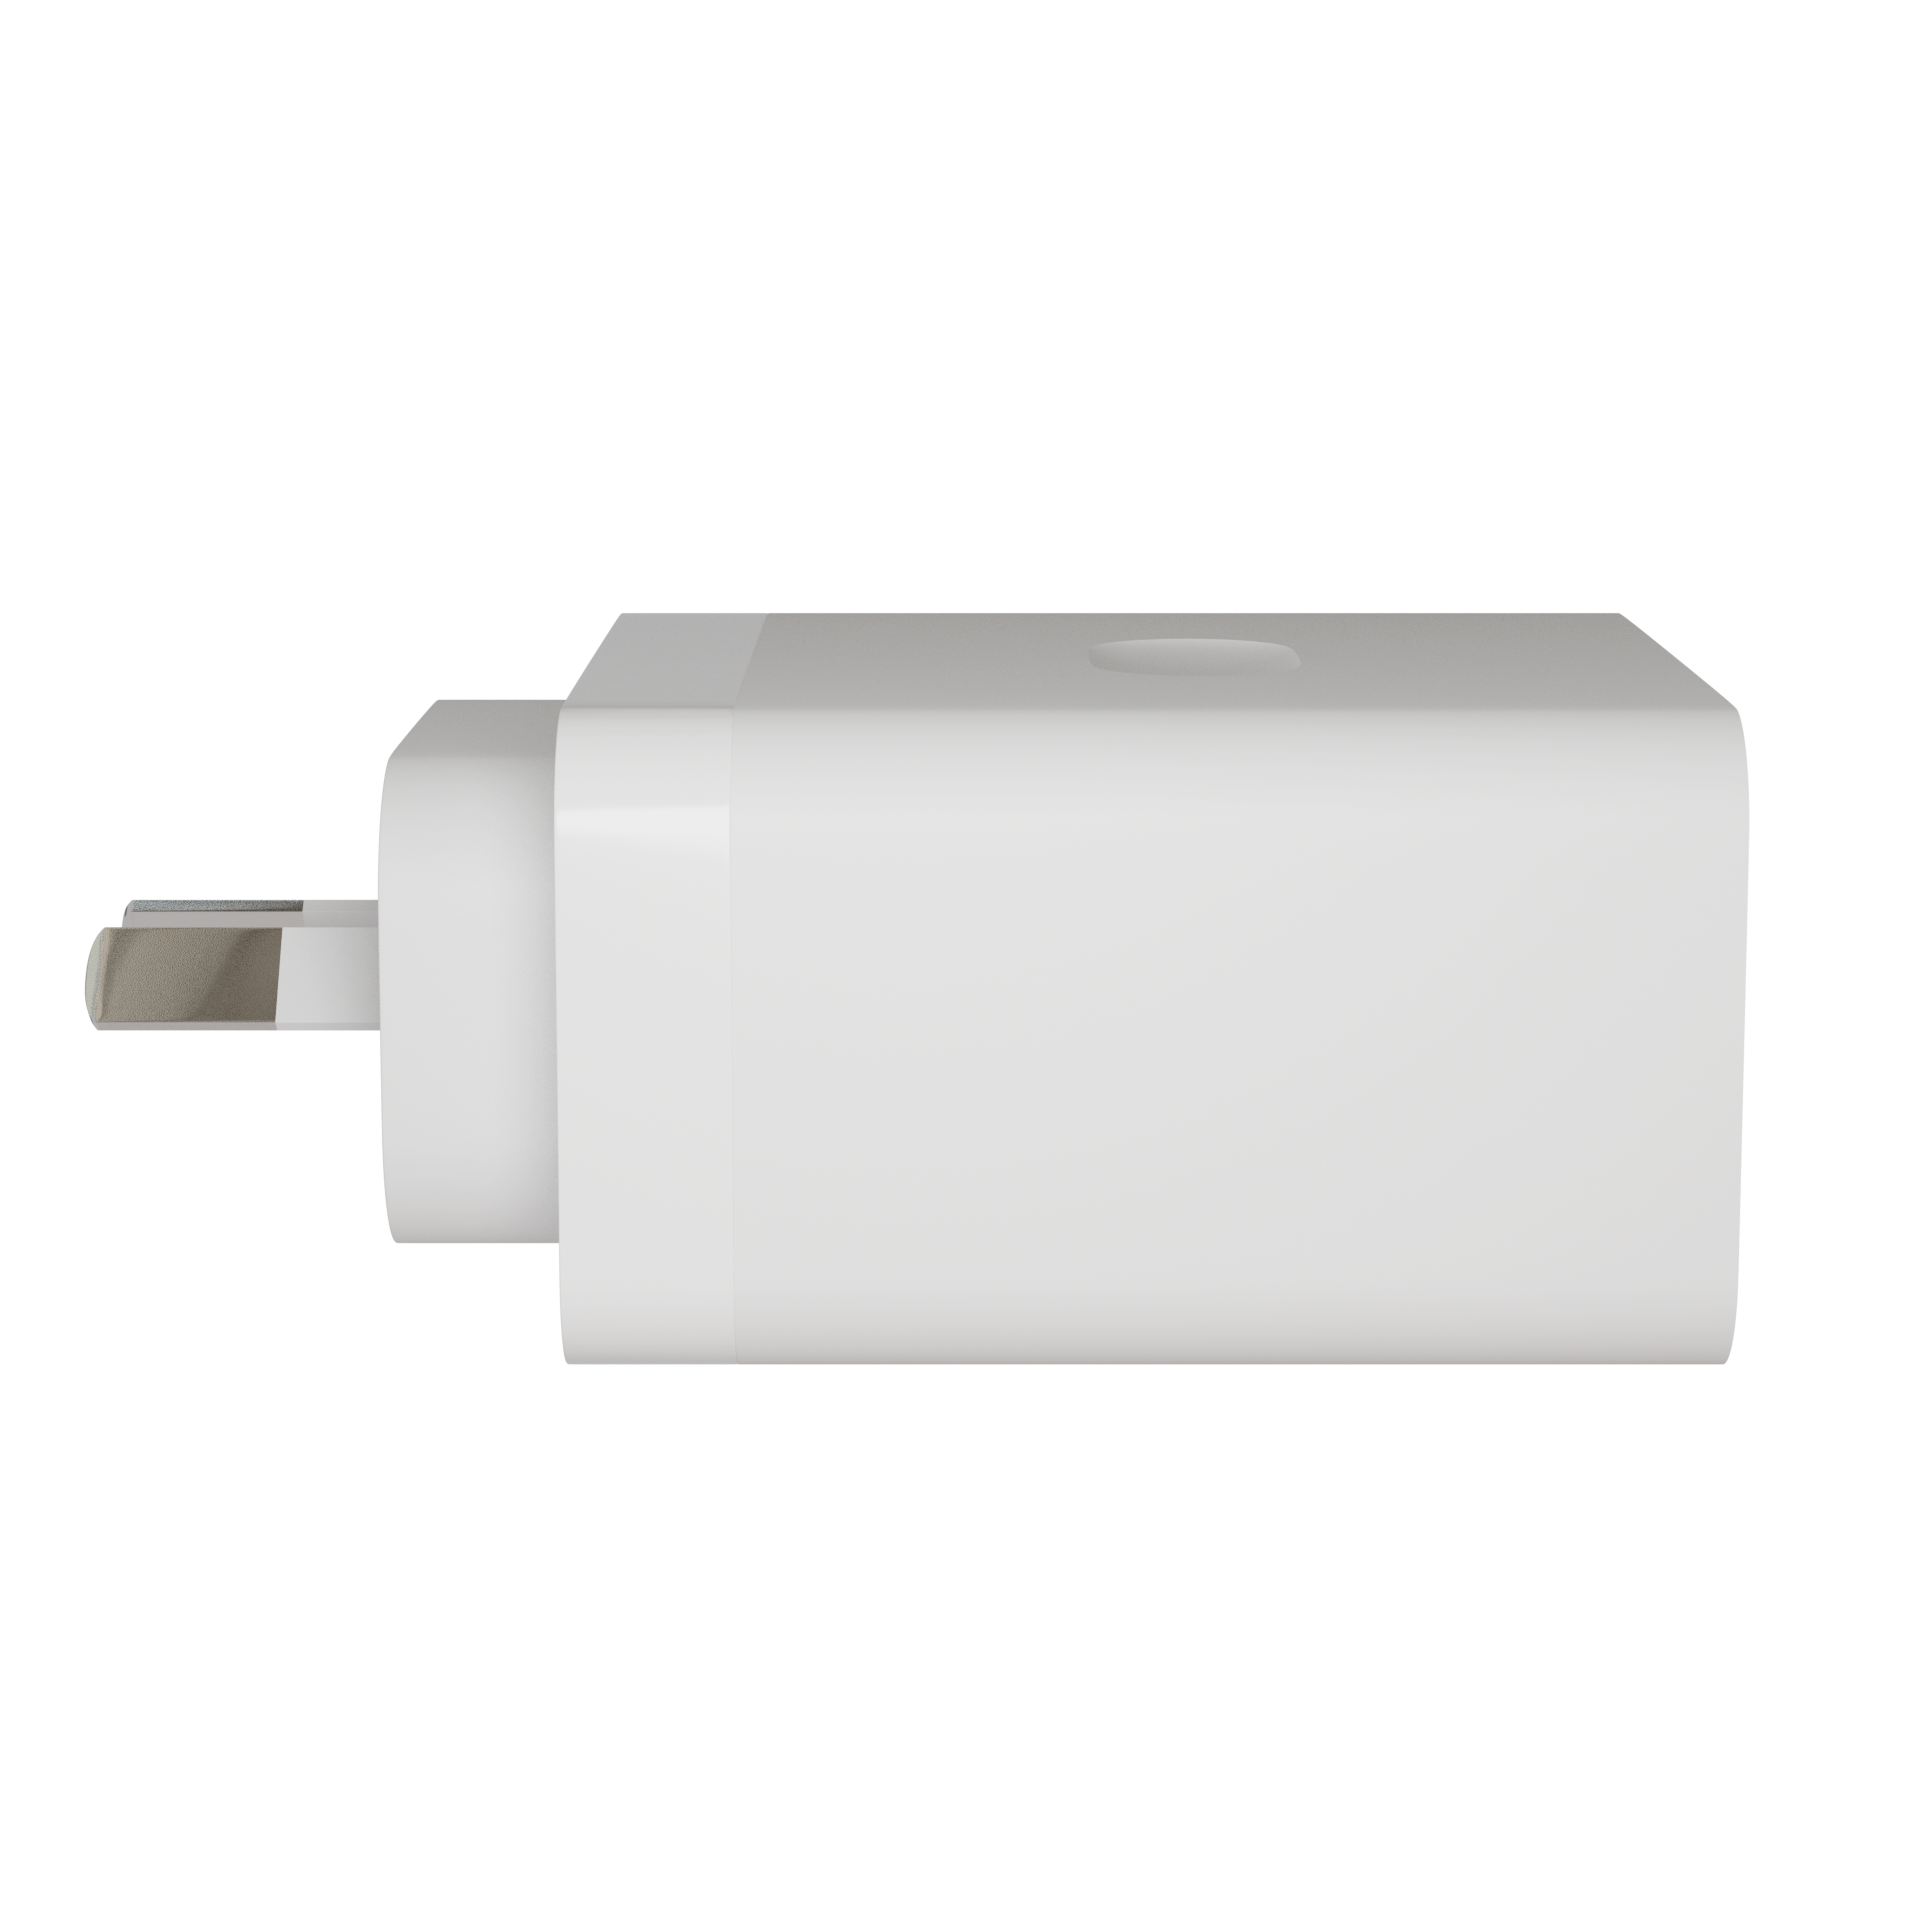 OPPO SUPERVOOC 67W Wall Charger